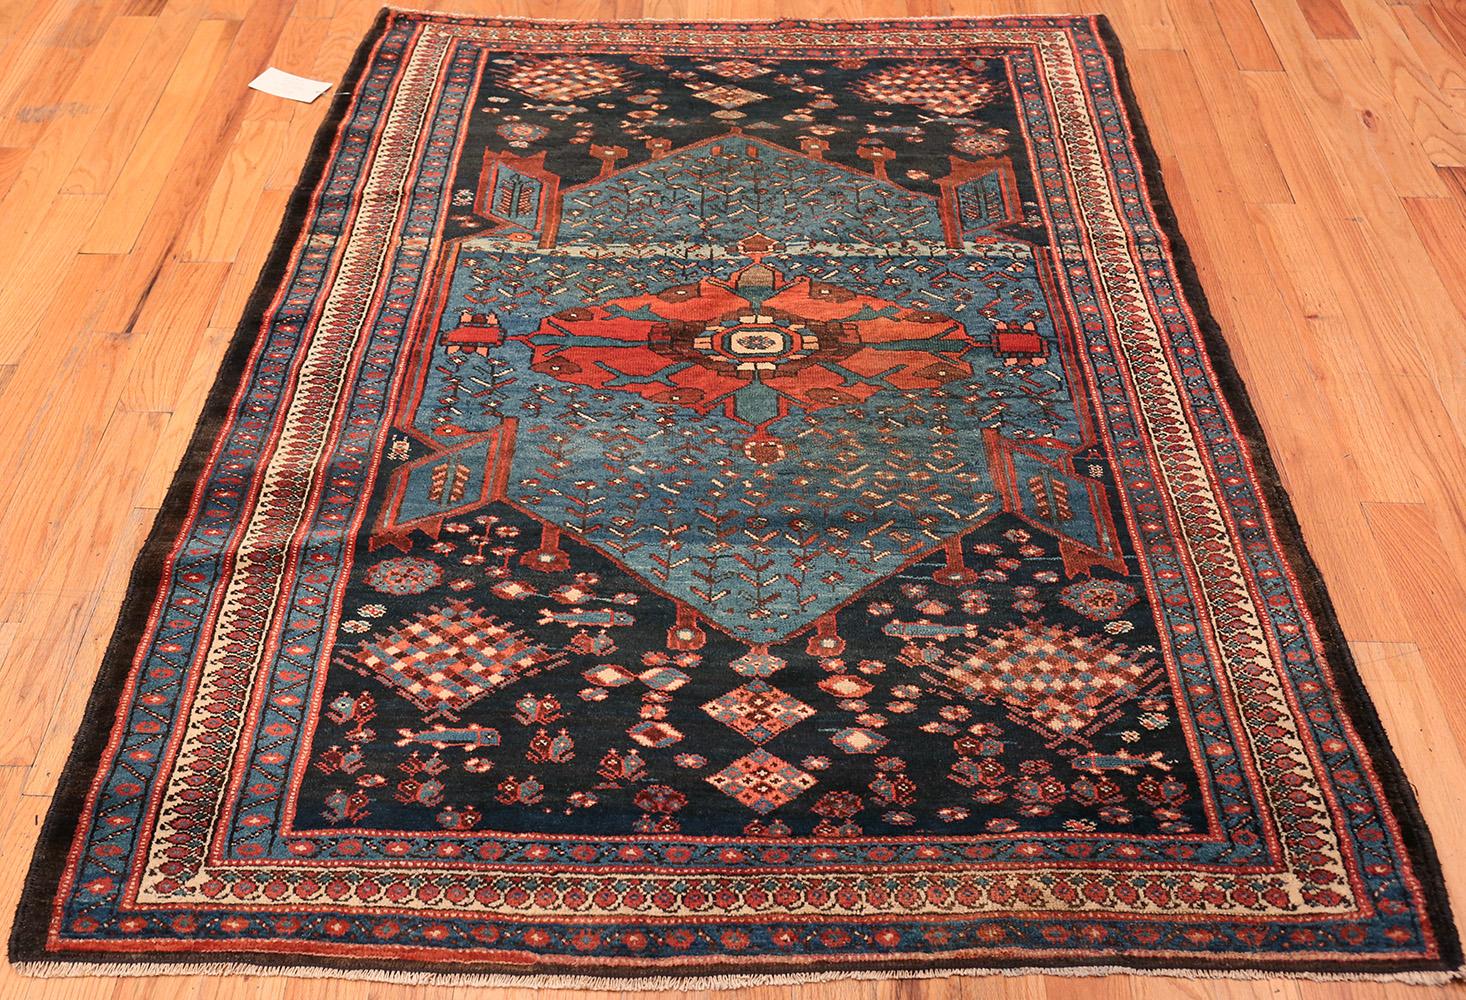 Antique Persian Malayer Rug. Size: 4 ft 7 in x 6 ft 5 in 2